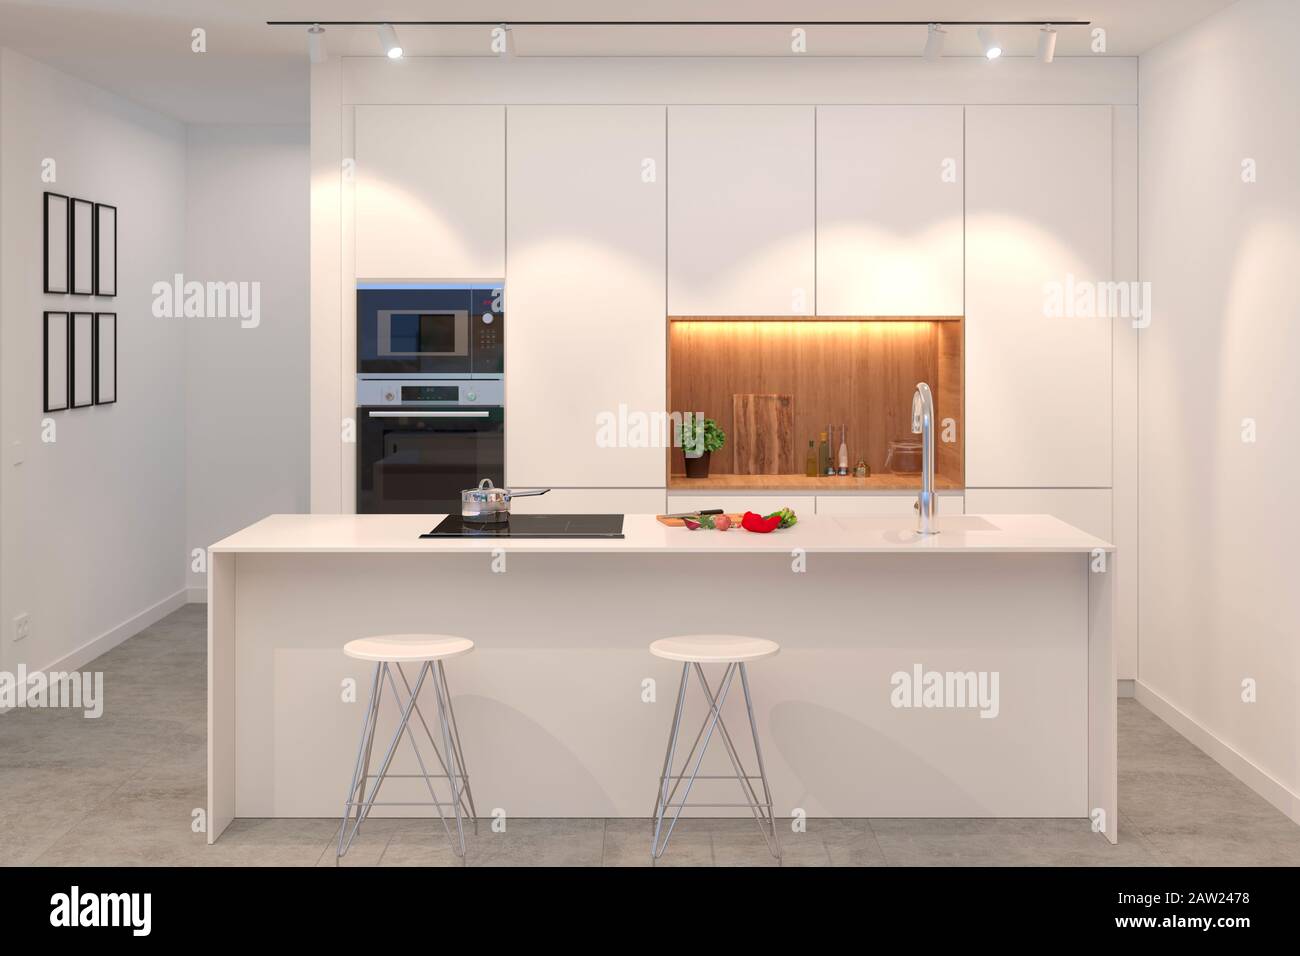 frontal view of interior design of clean modern white kitchen with island Stock Photo